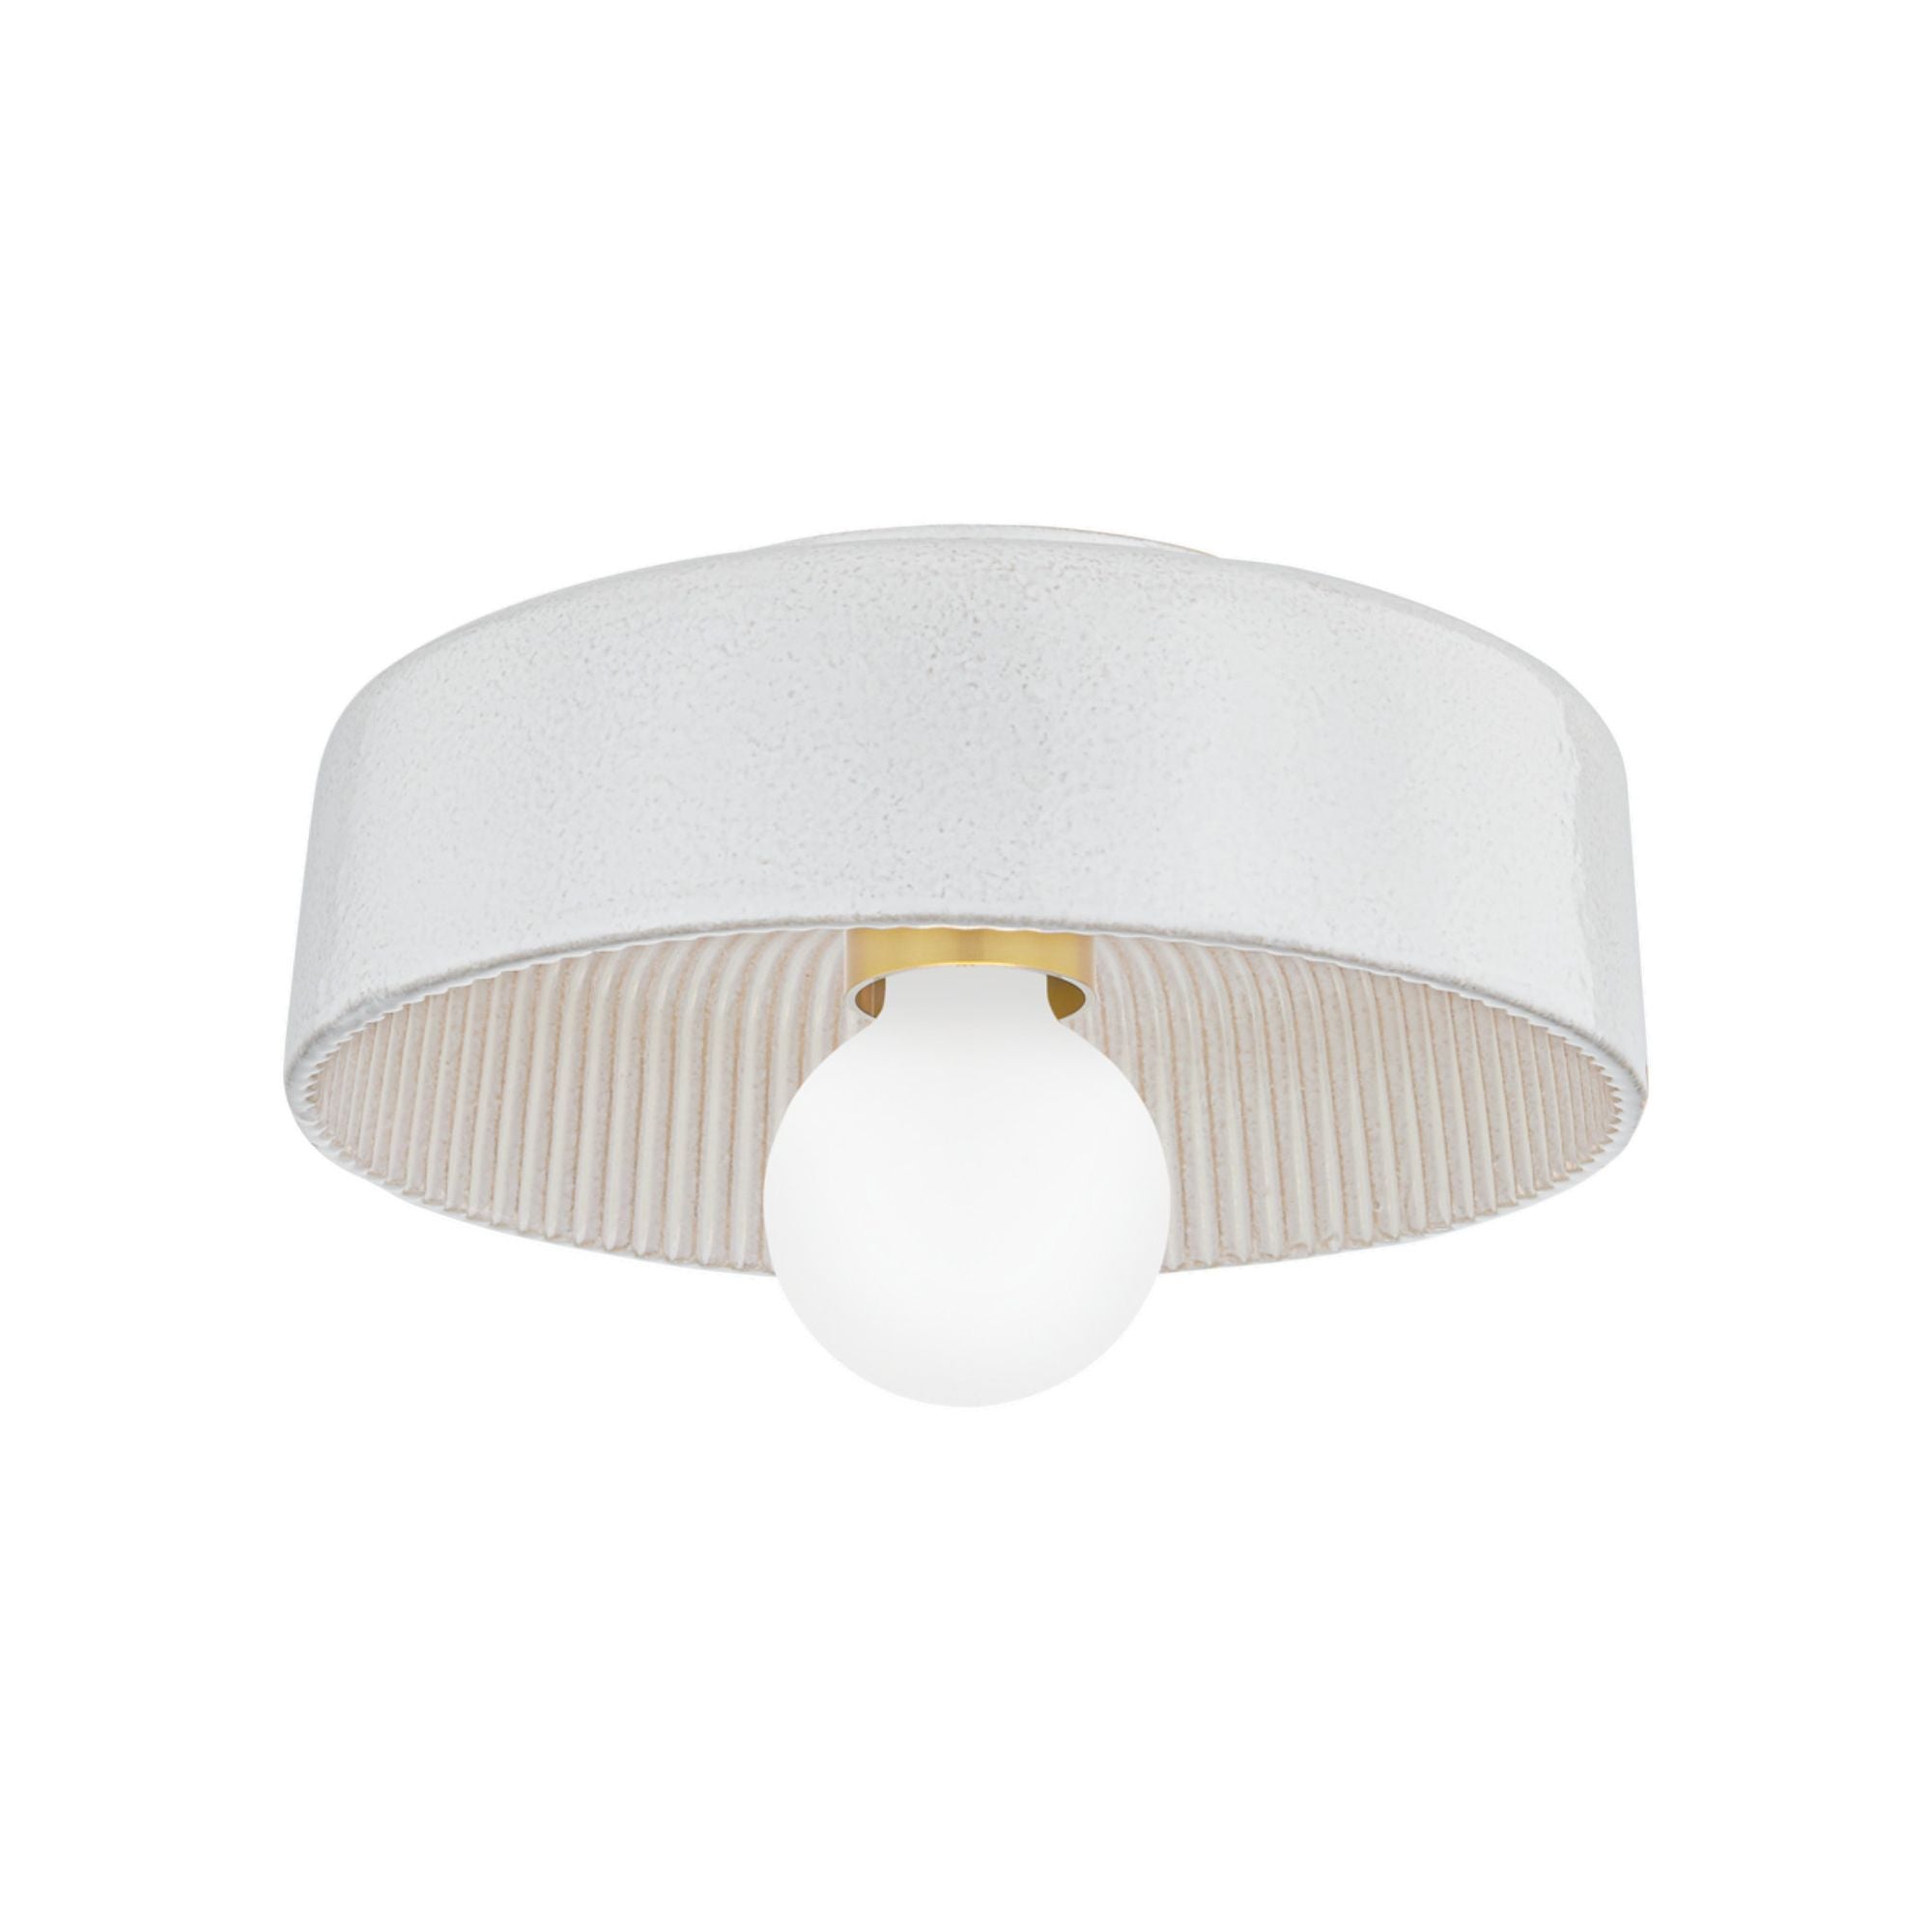 Ray 1-Light Flush Mount in Aged Brass/ Ceramic Reactive White by The Lifestyled Co